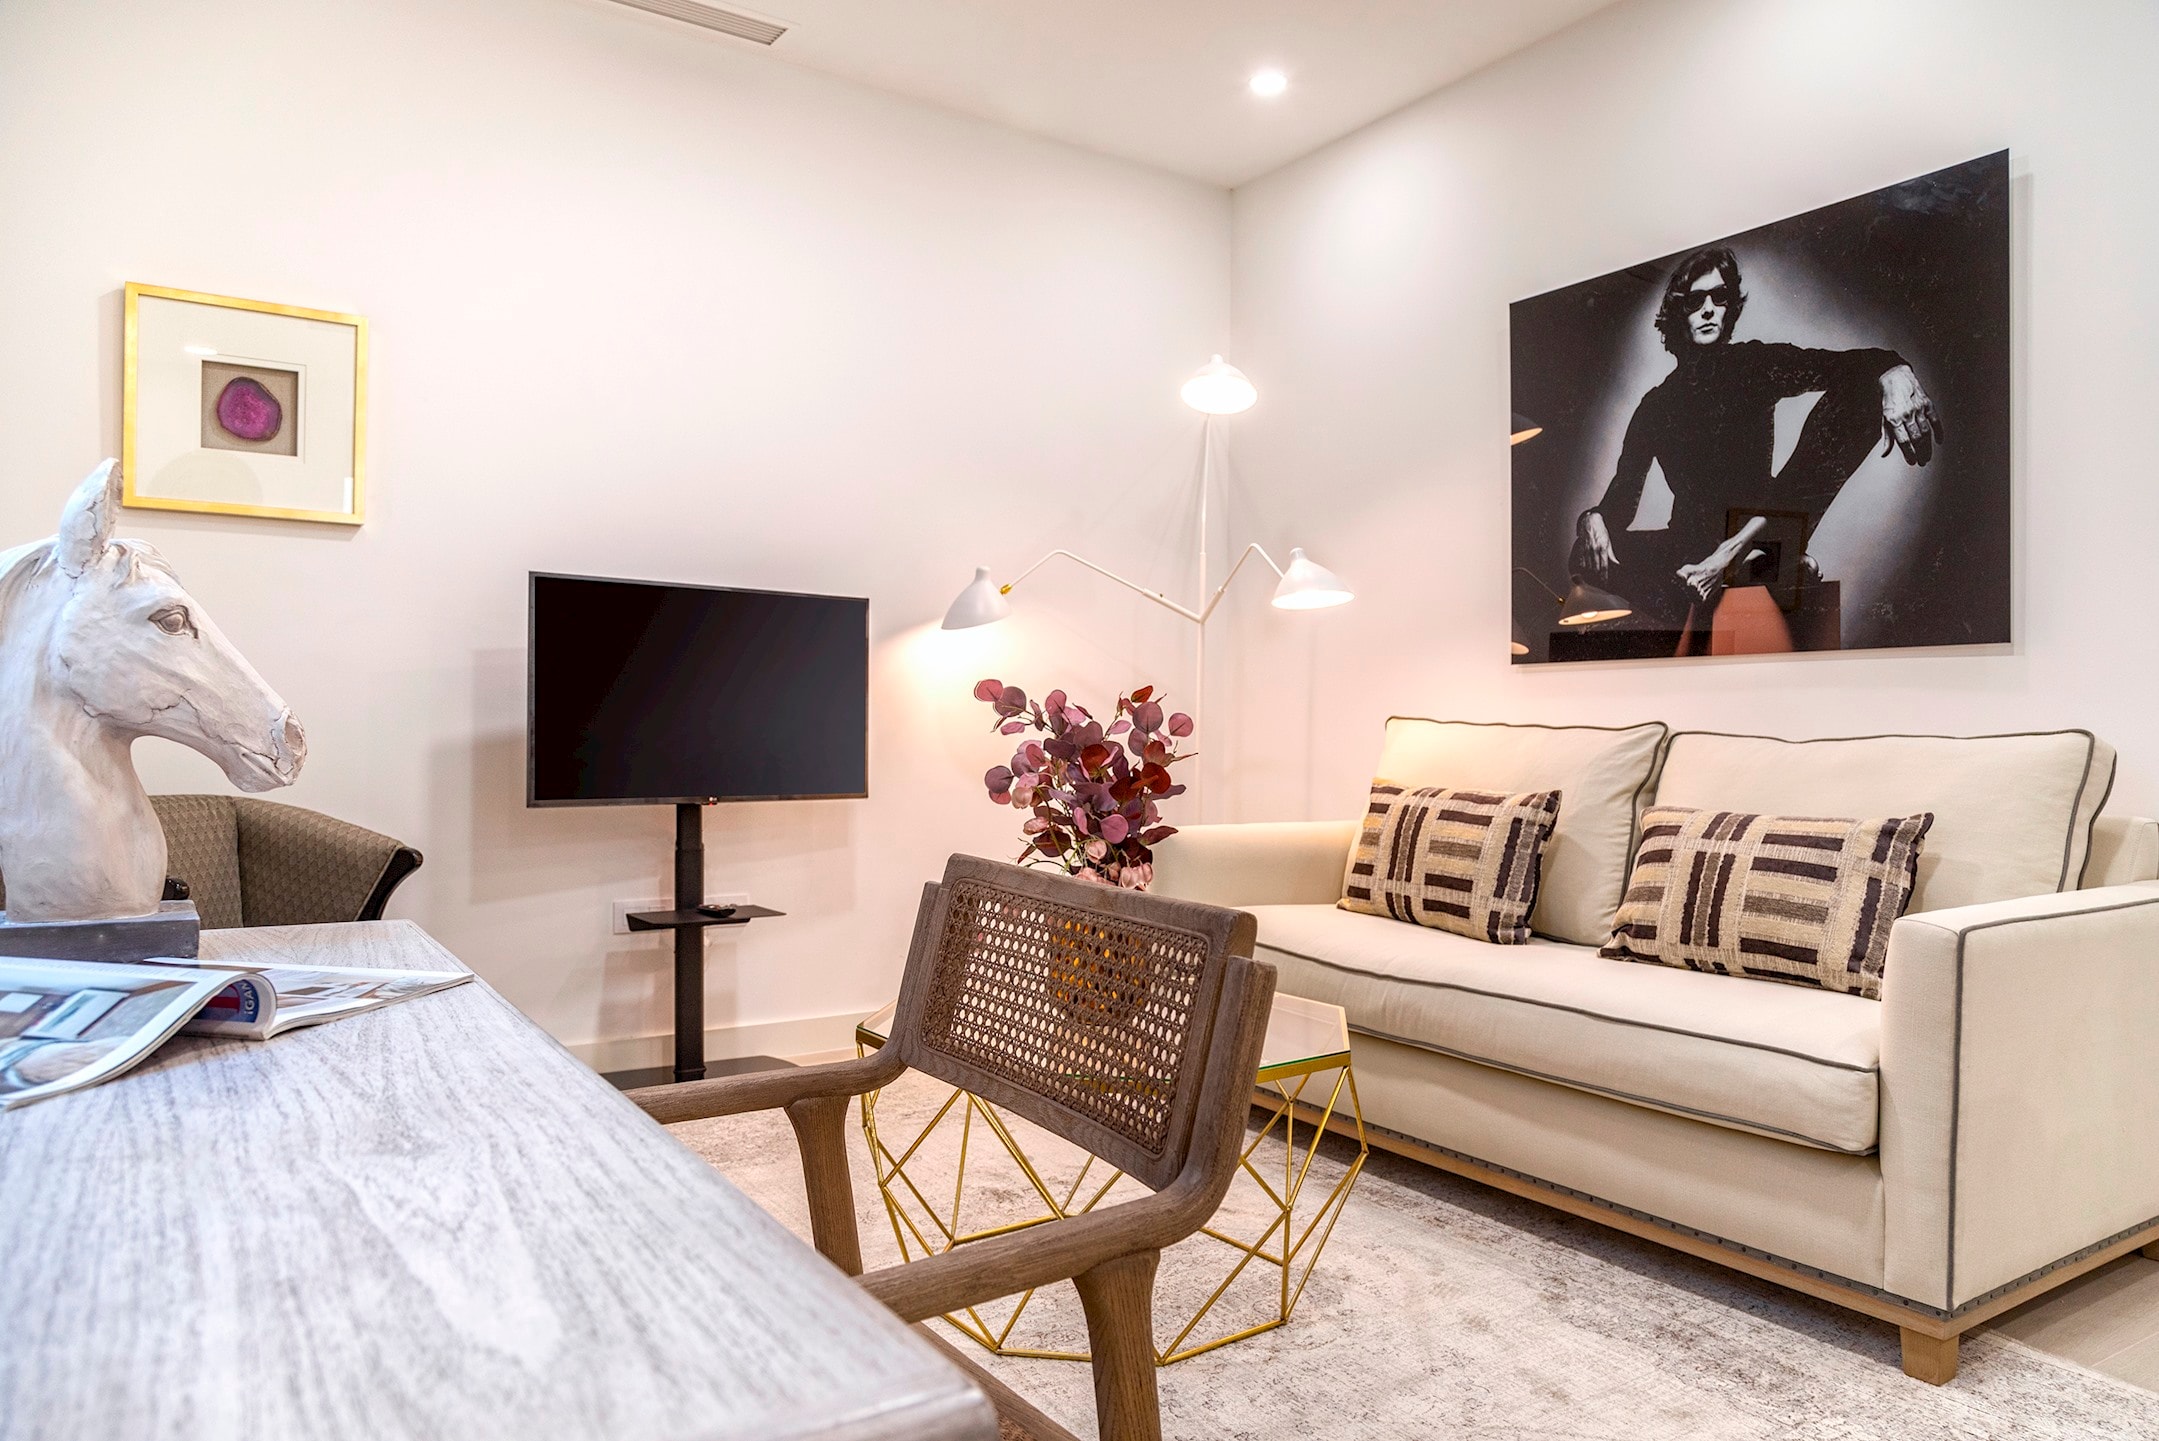 Property Image 2 - Modern apartment in the city center. Feria III